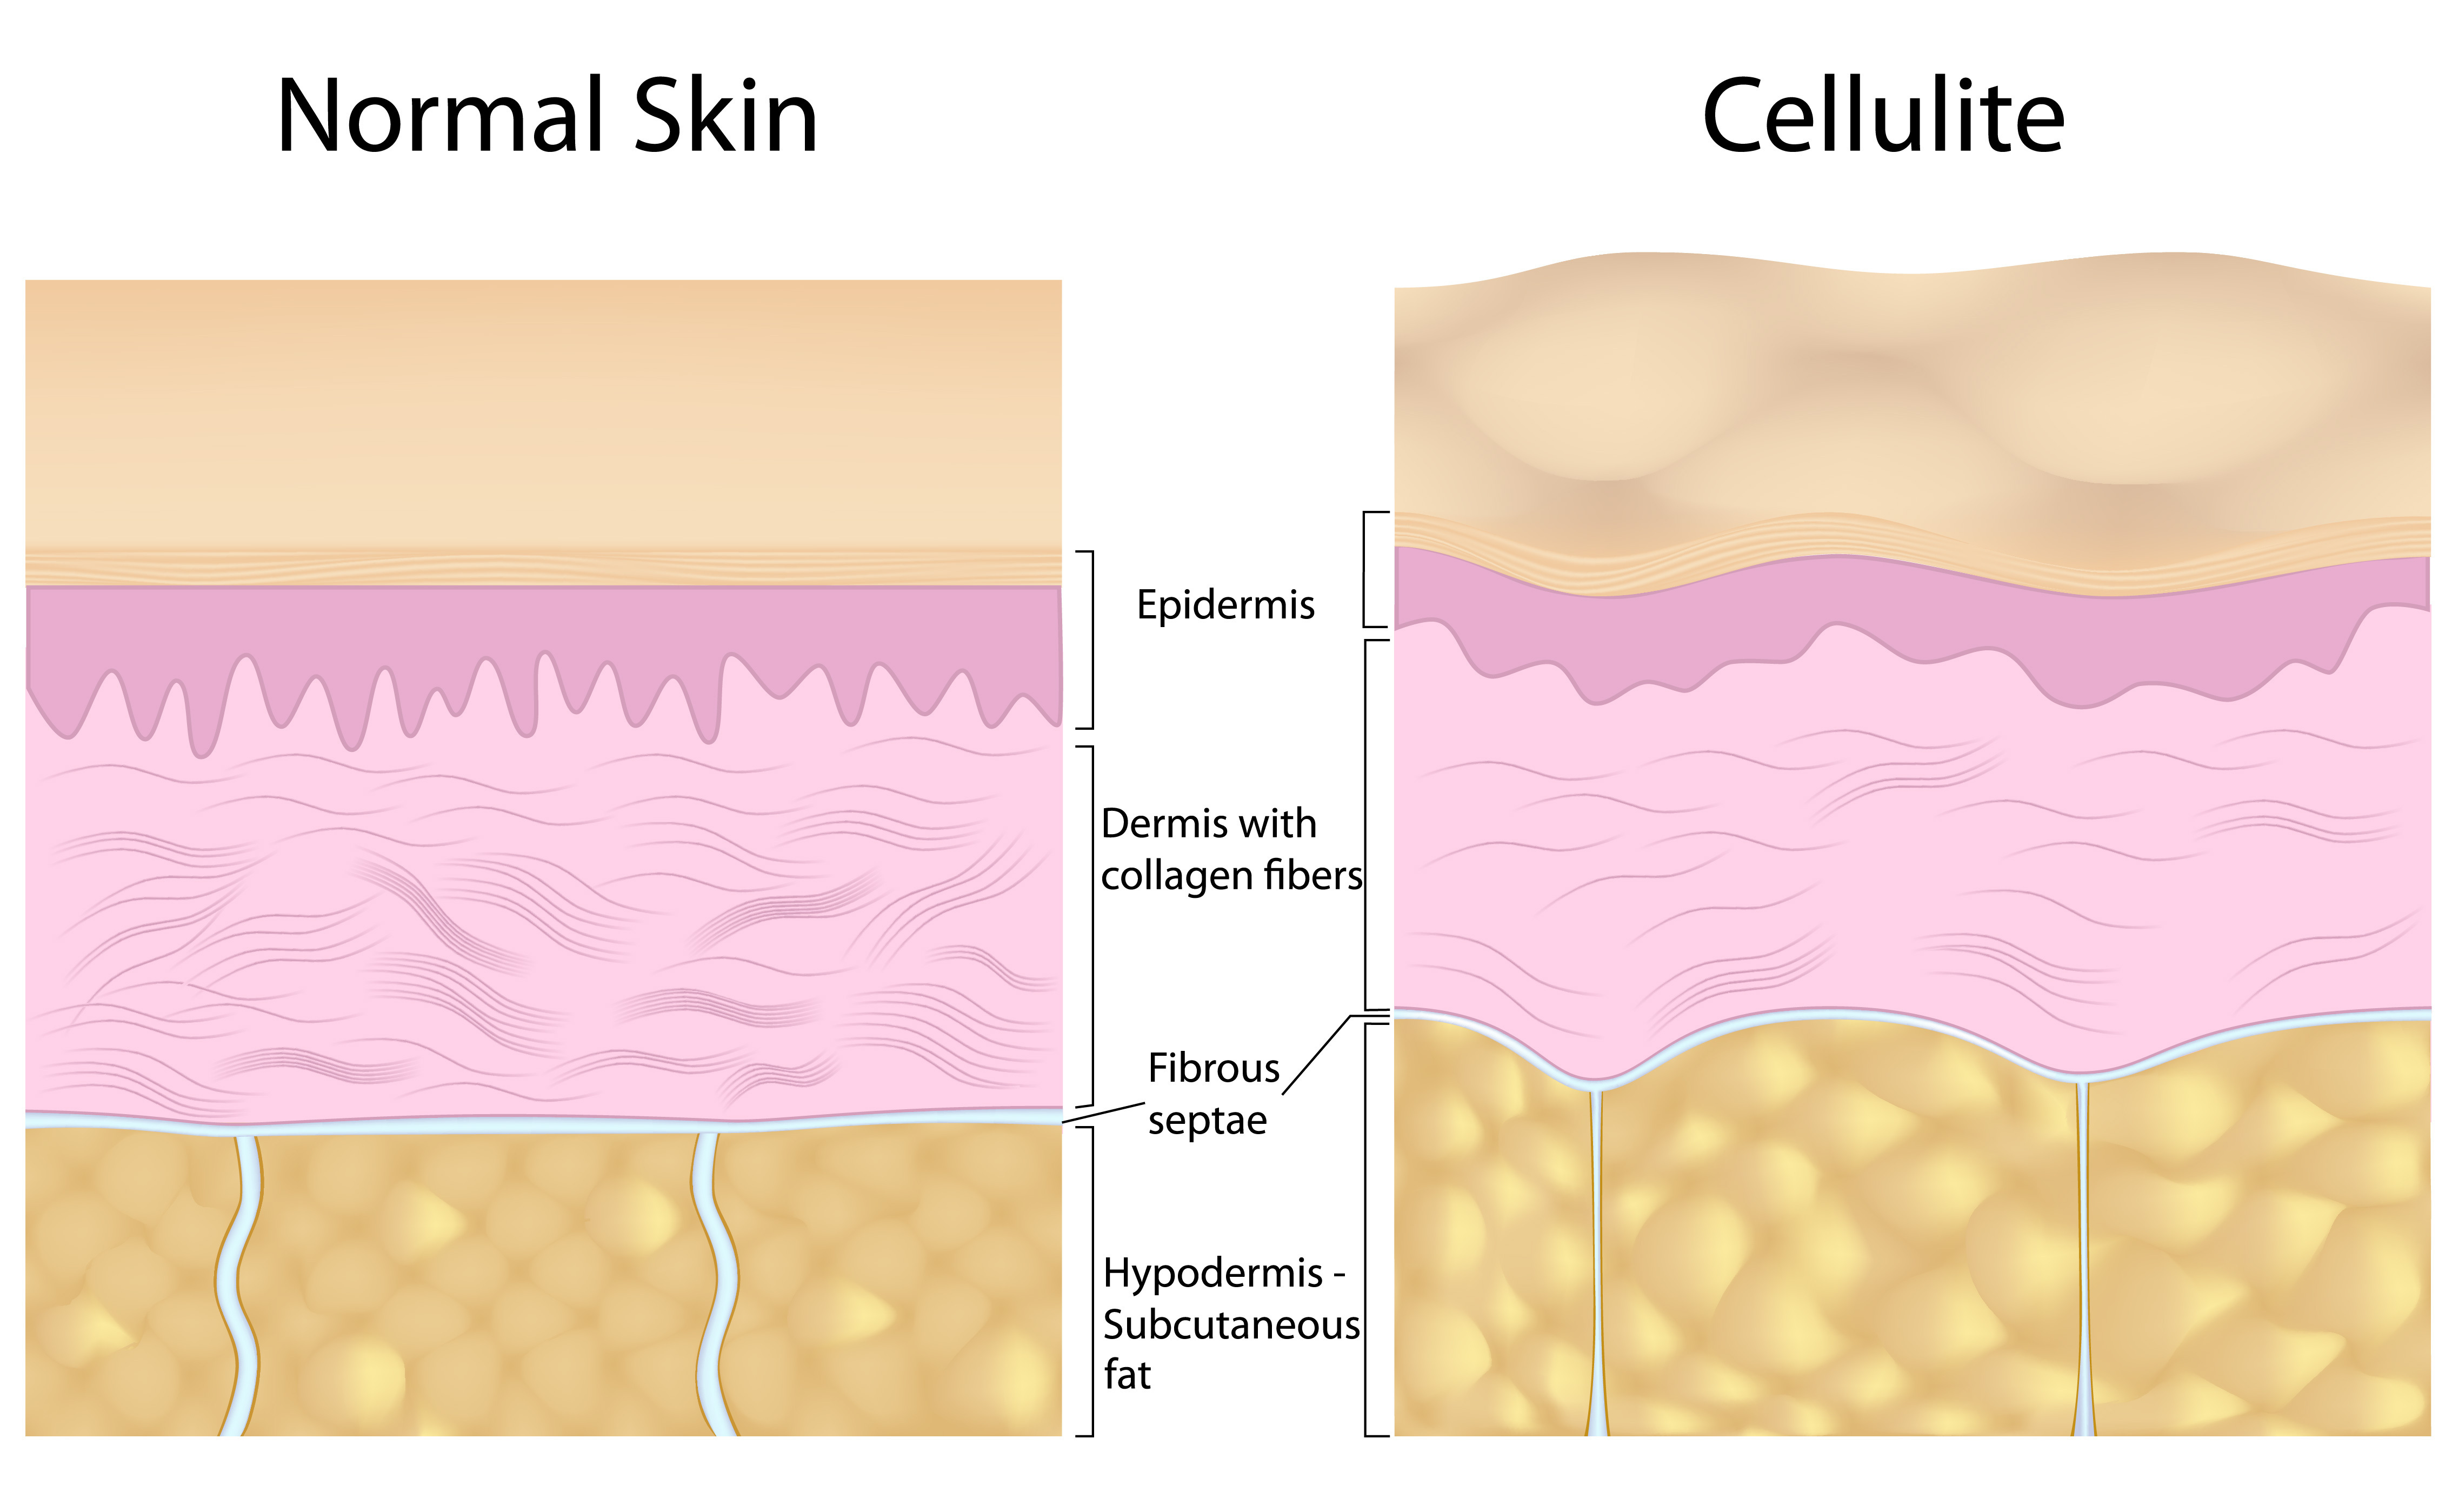 Difference between Normal Skin and Cellulite